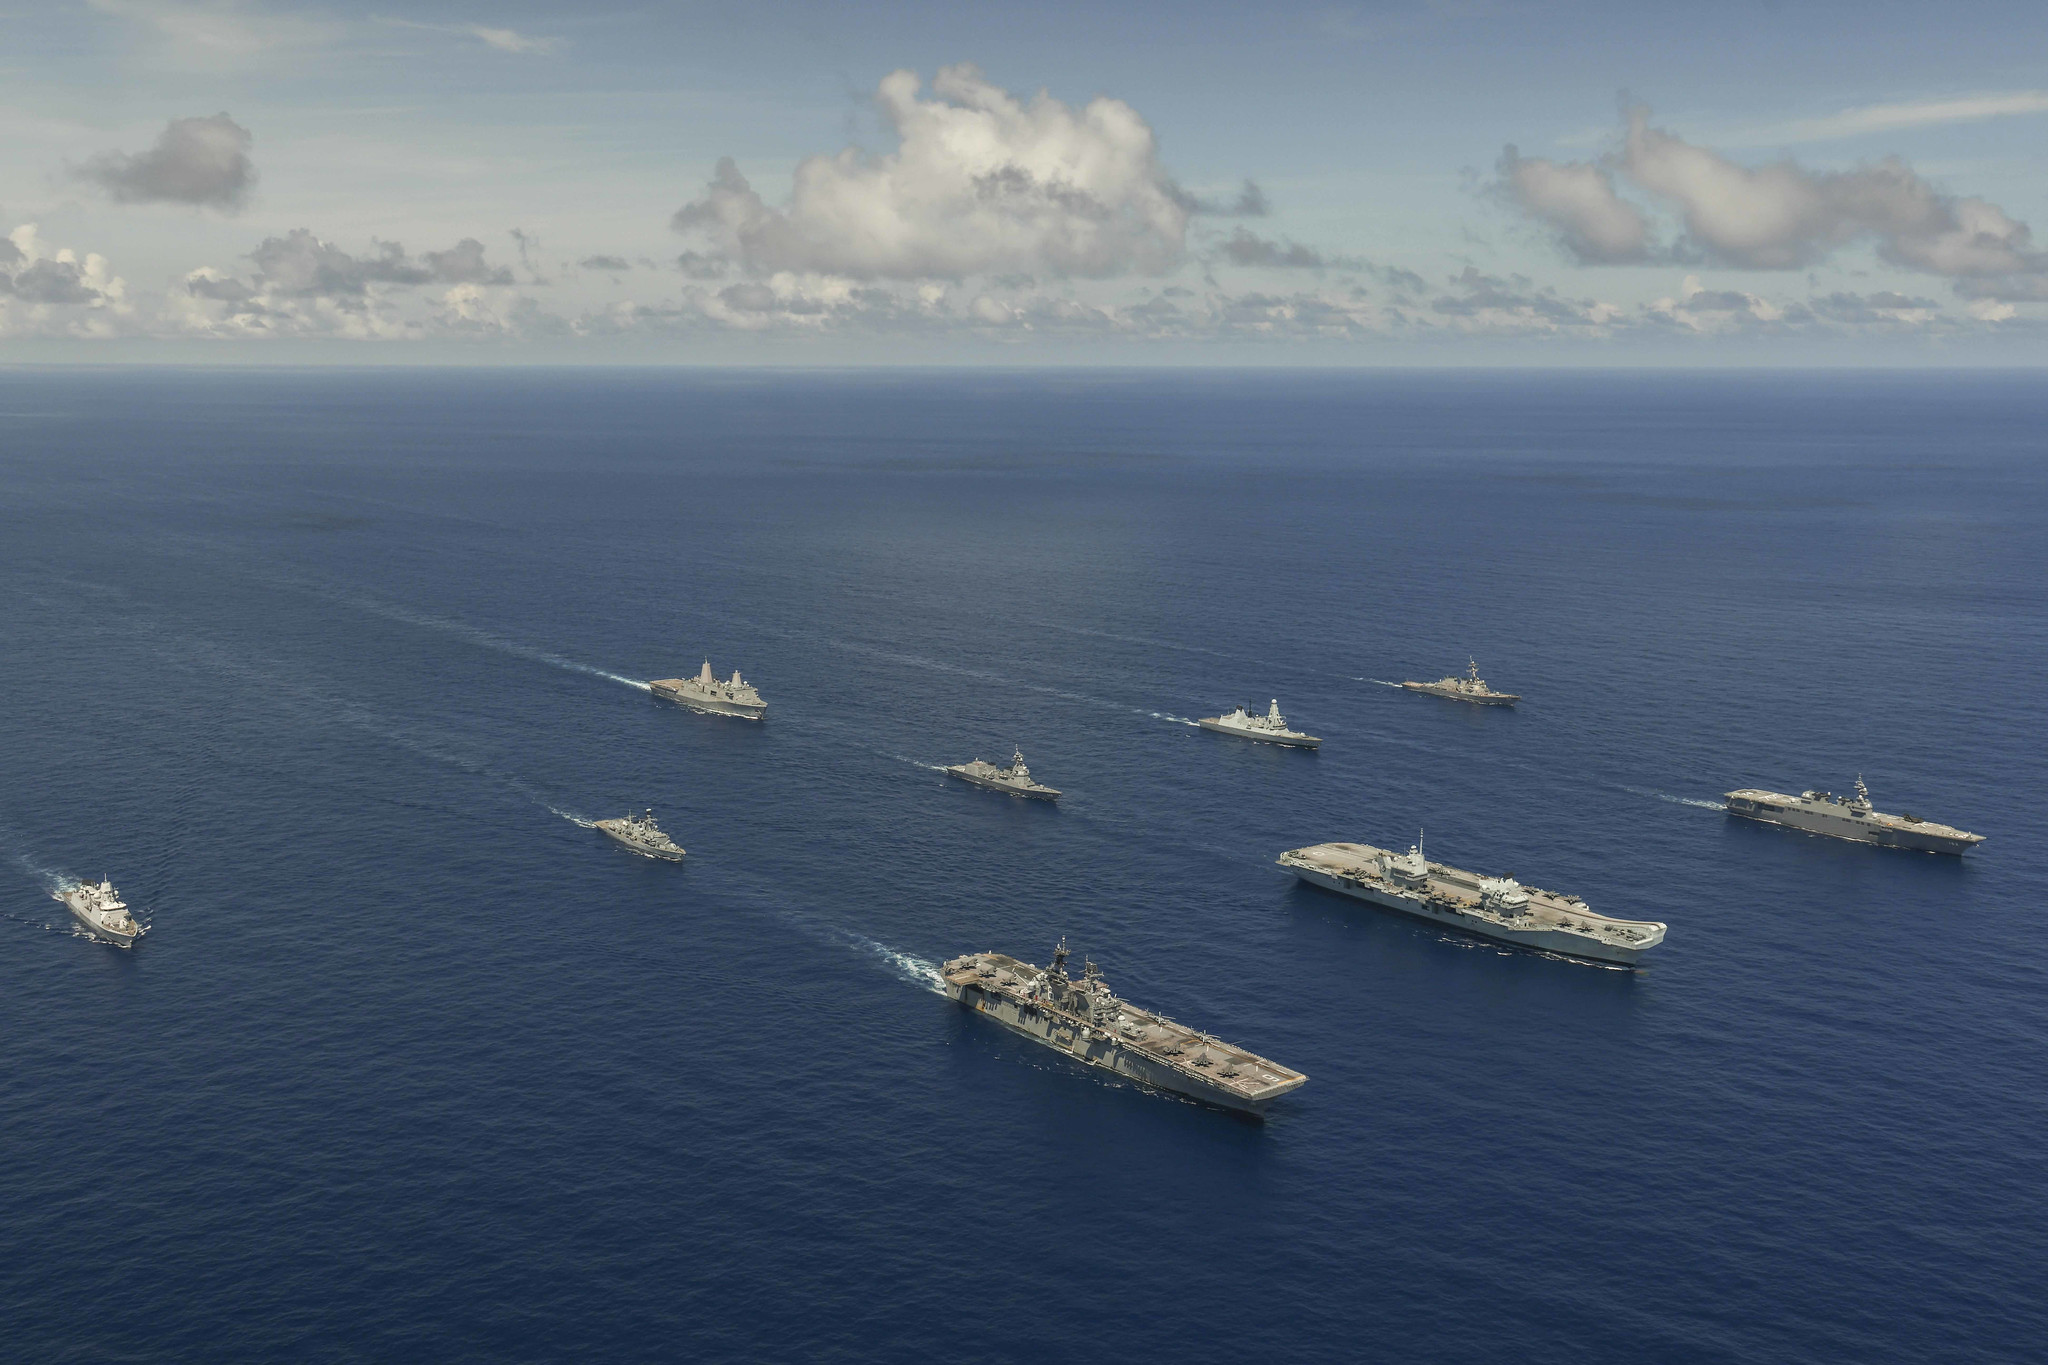 Japanese, British, and U.S. Navy Ships in the Philippine Sea